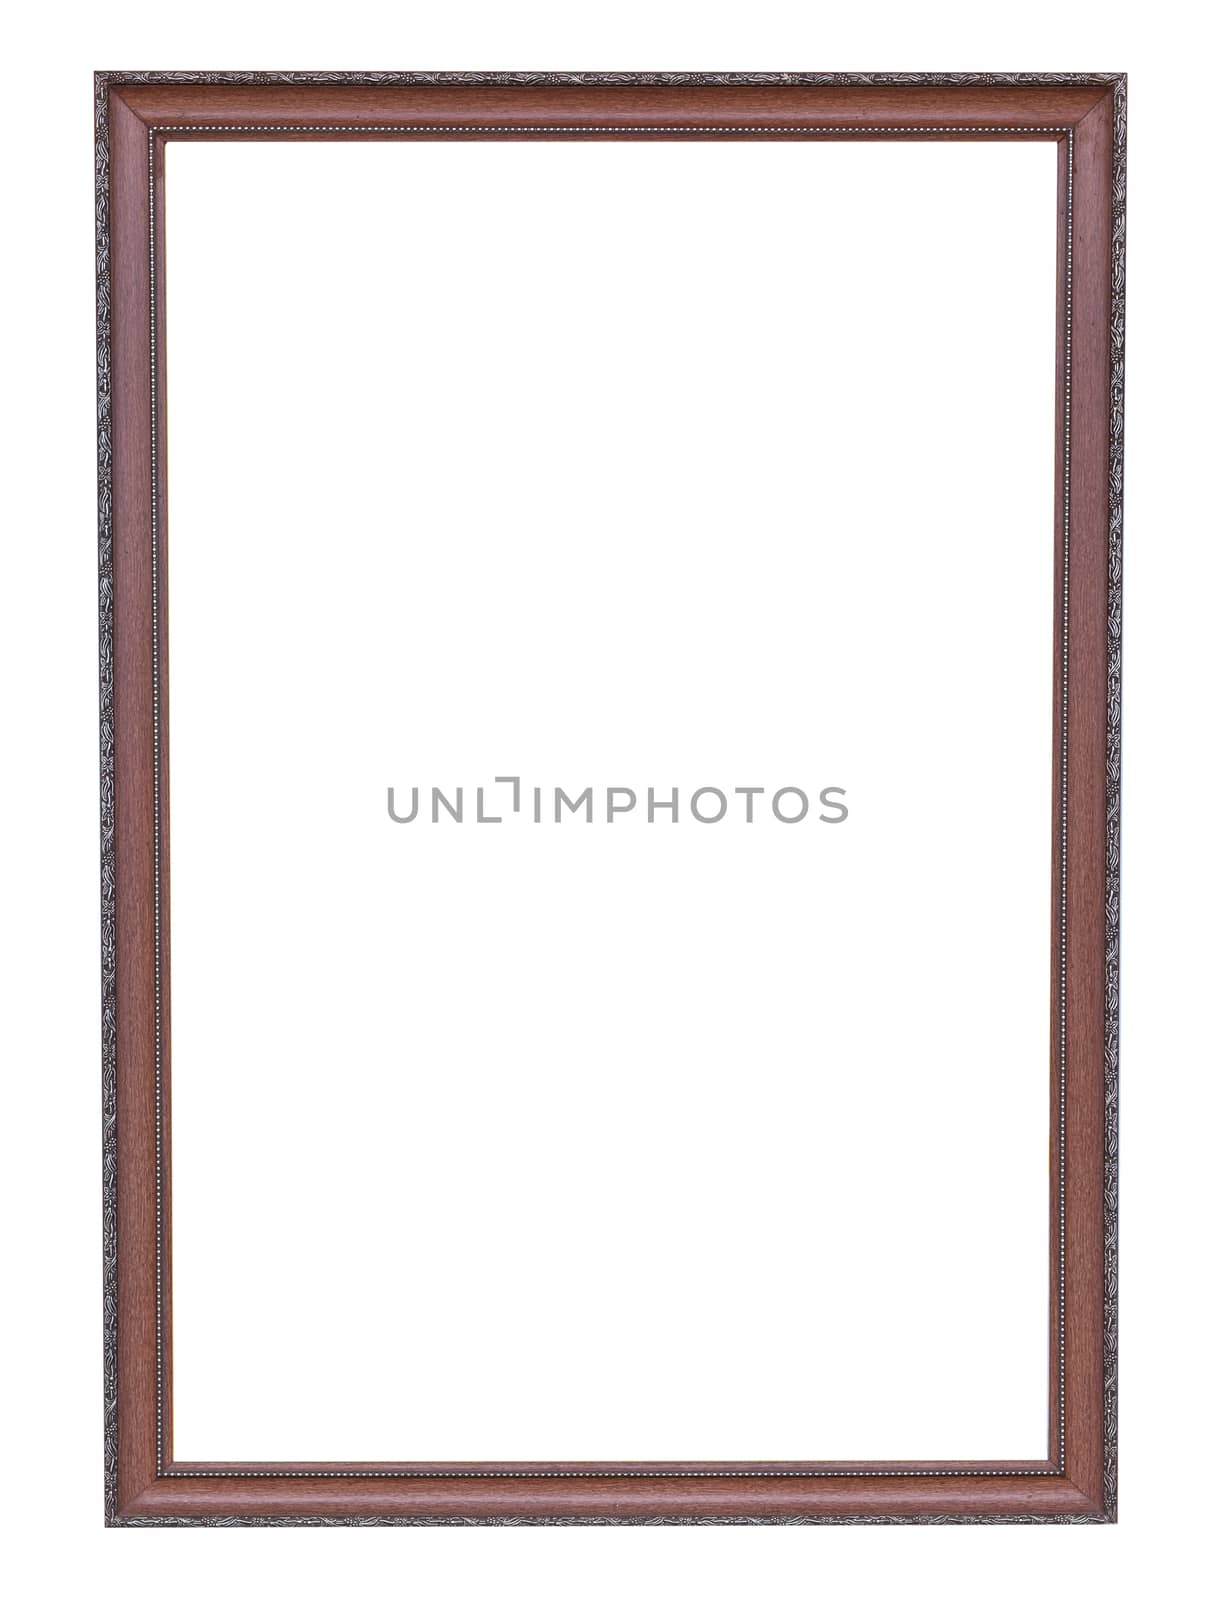 Bronze copper and Old Frame vintage isolated on white background by jayzynism